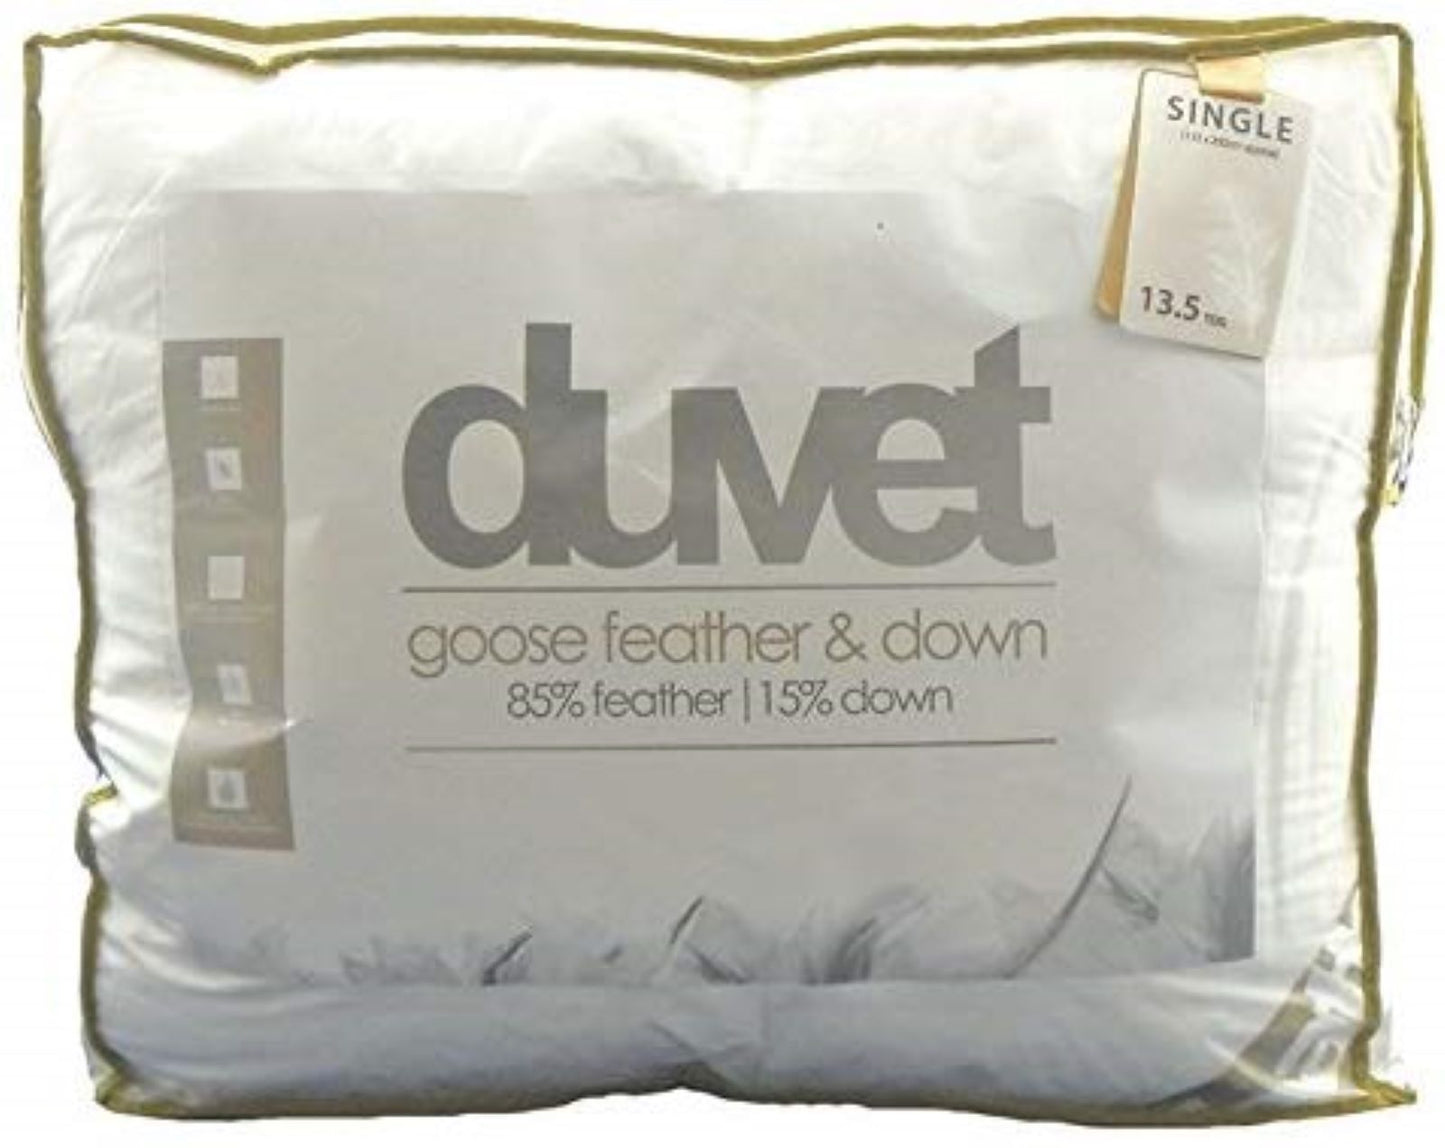 13.5 Tog Goose Feather and Down Duvet